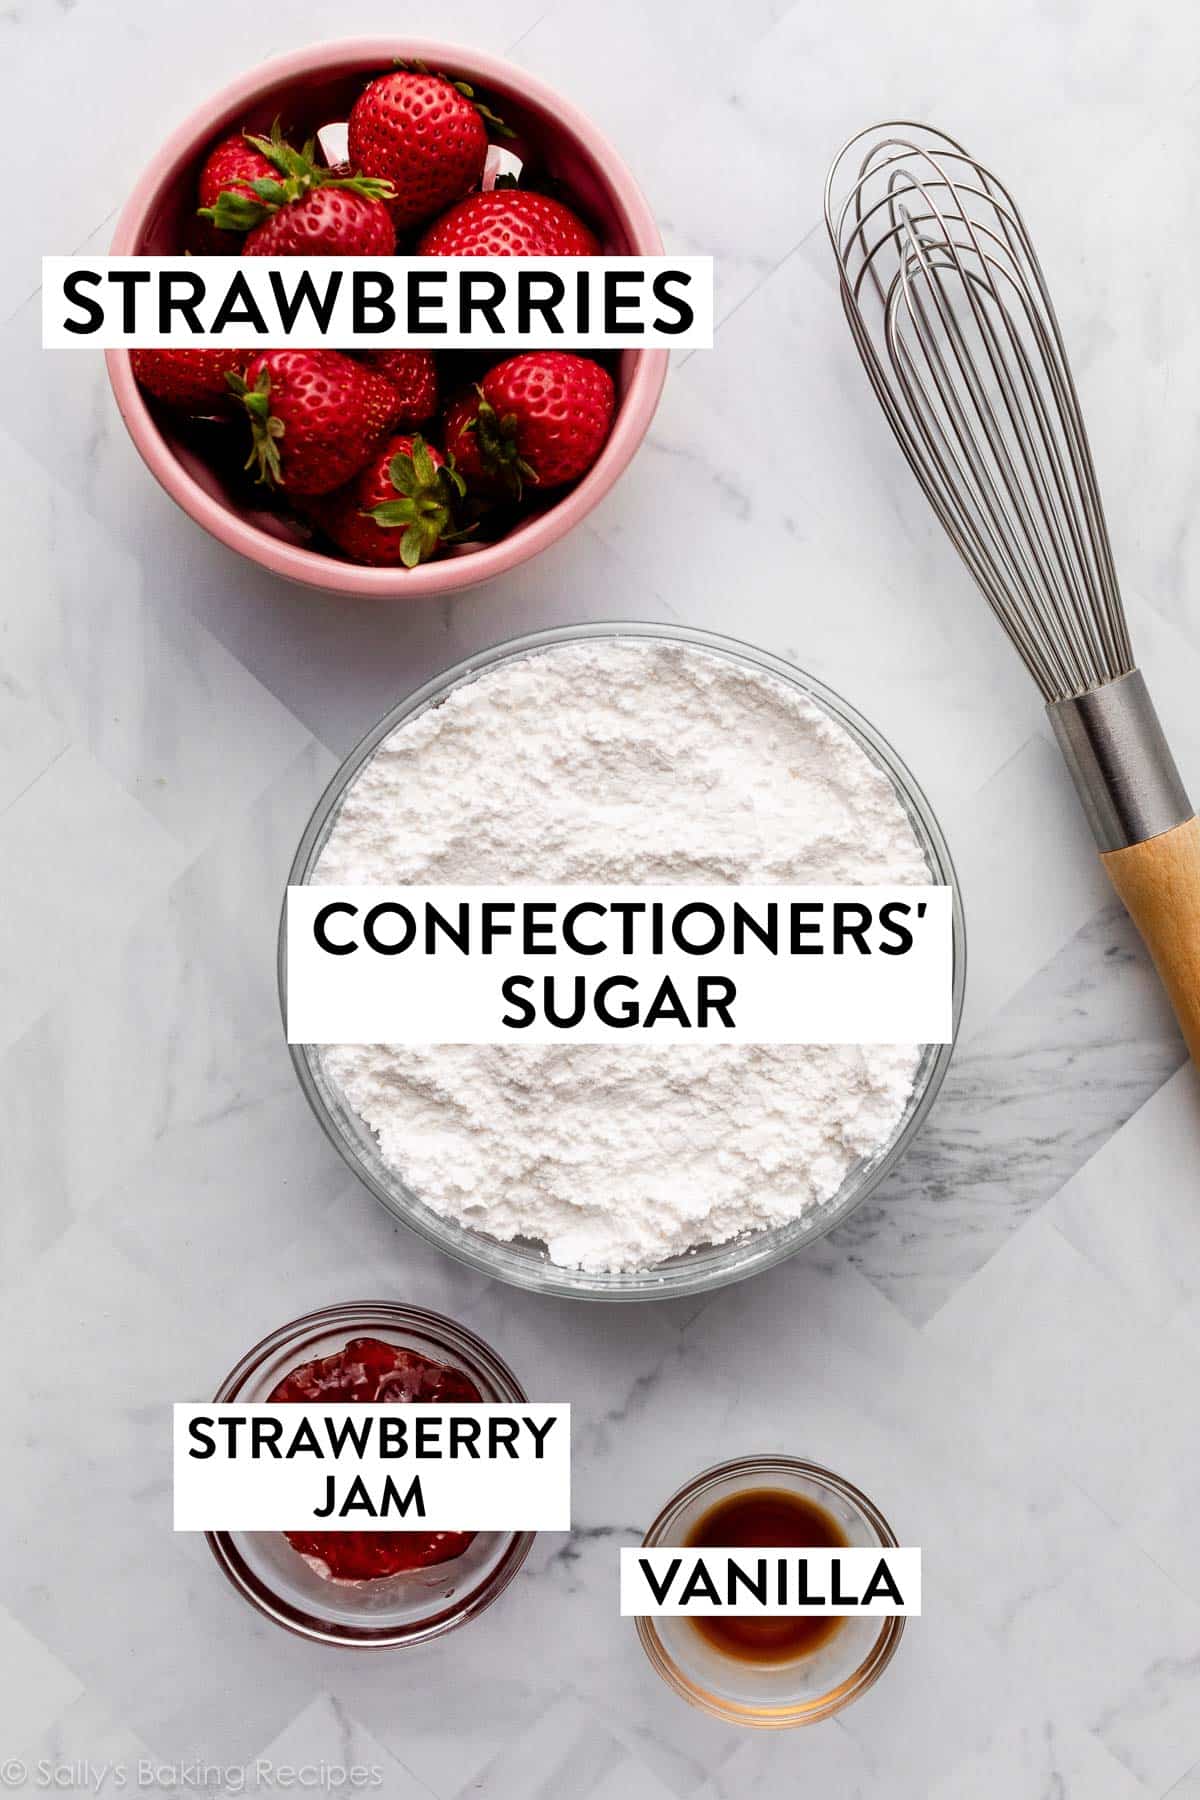 ingredients on counter including confectioners' sugar, strawberries, jam, and vanilla.